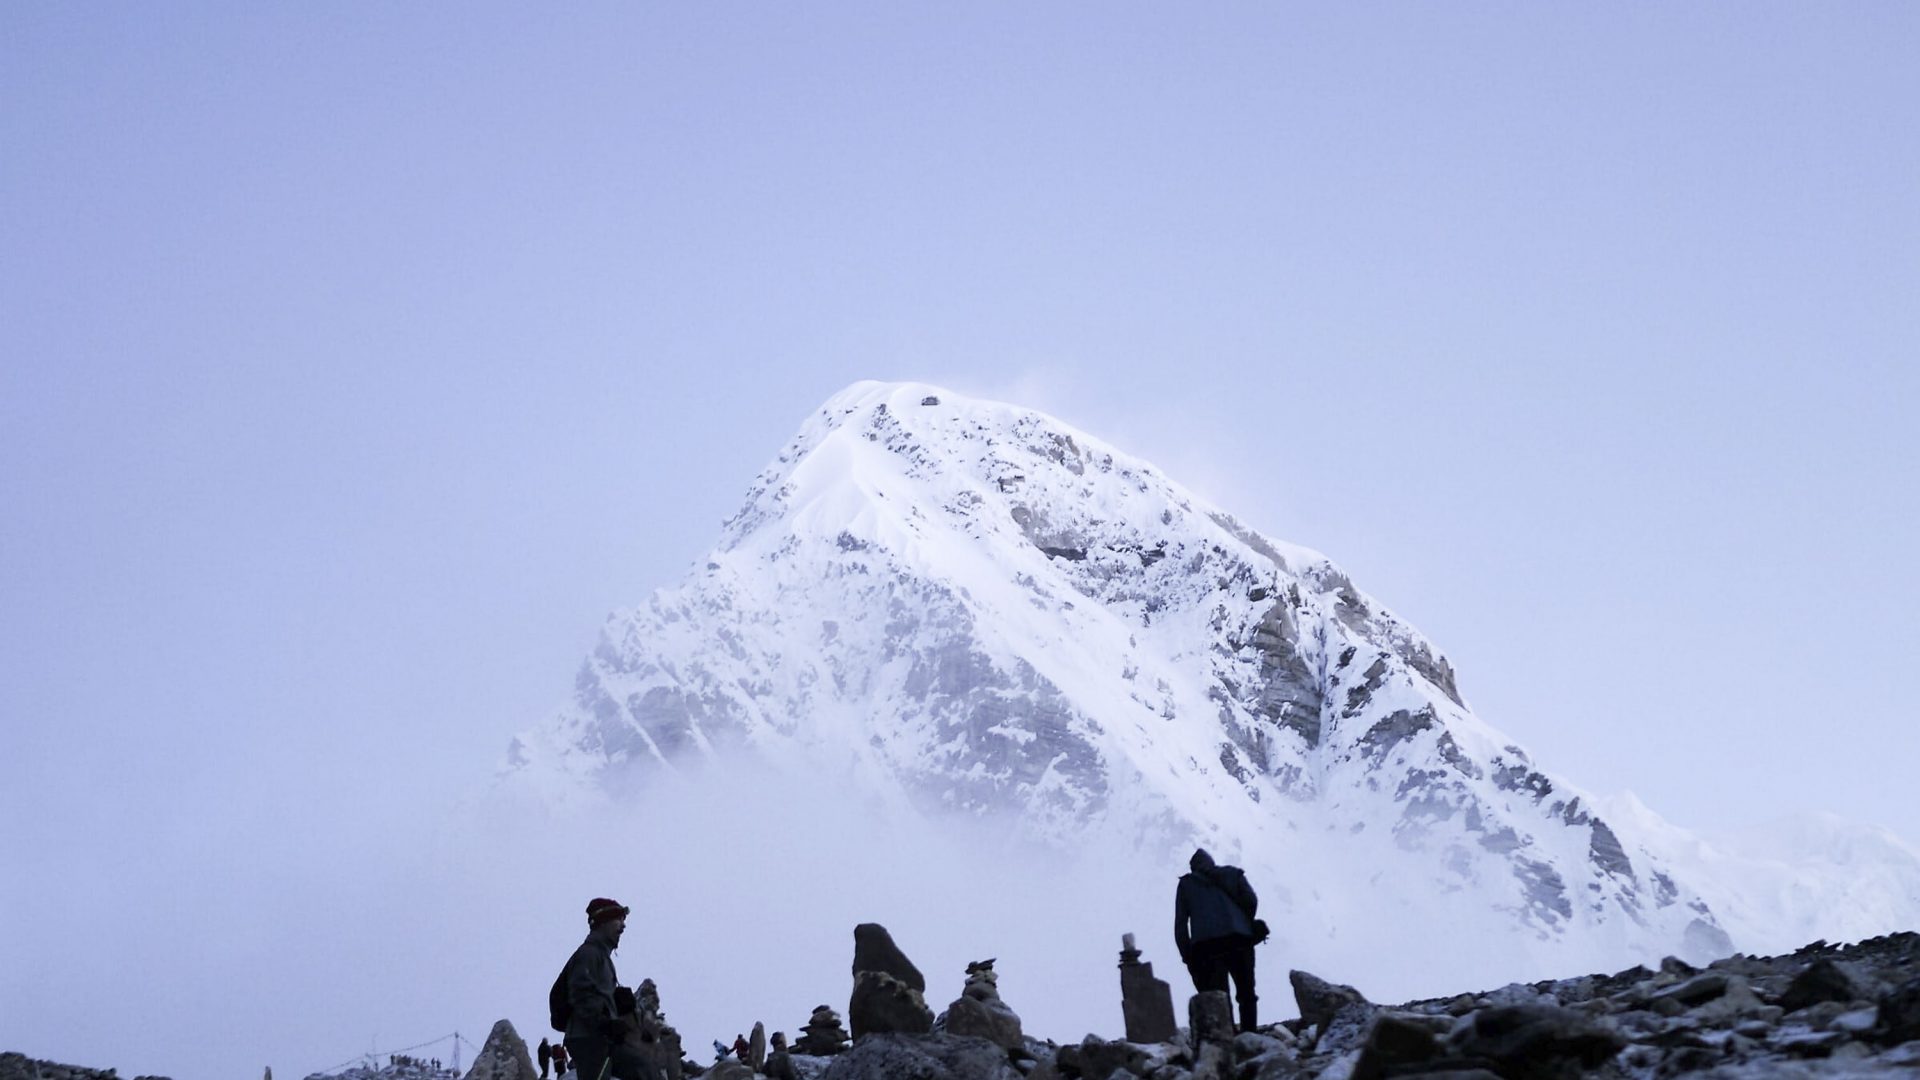 People at Mount Everest Base camp gather to look up at the mountain.